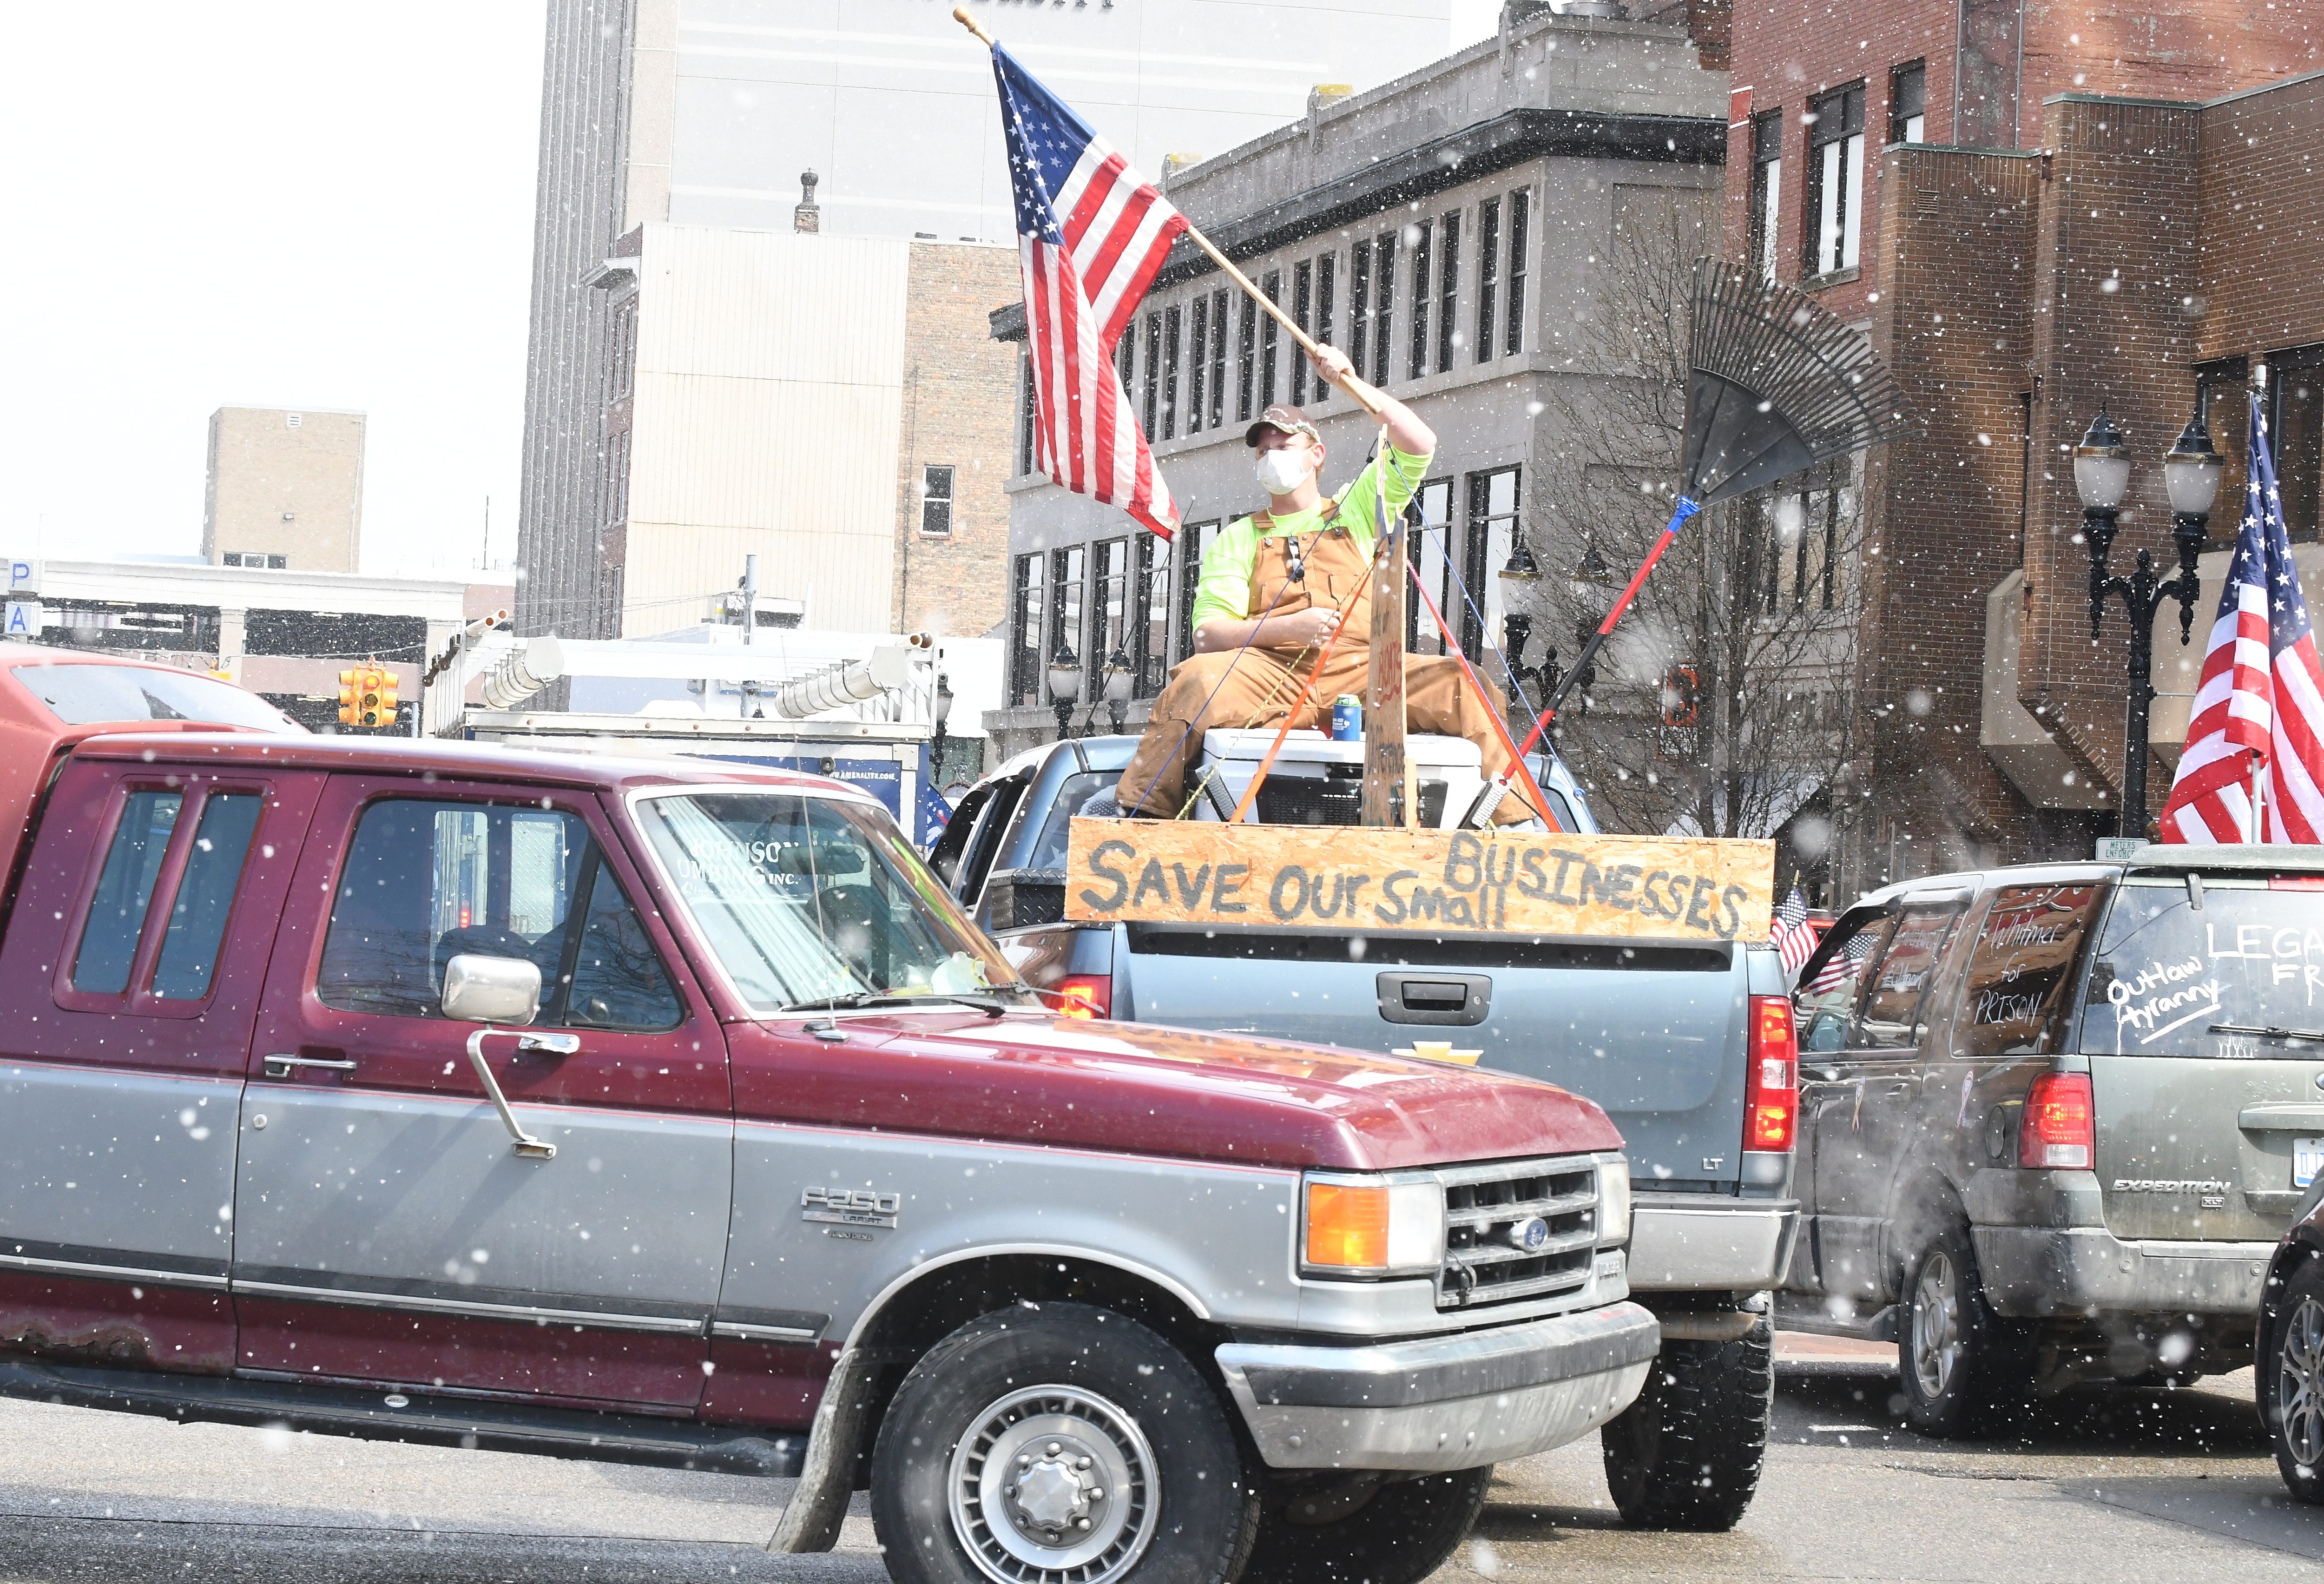 Protestors, from their cars and on foot, surround the State Capitol during "Operation Gridlock" in Lansing, Michigan on April 15, 2020.